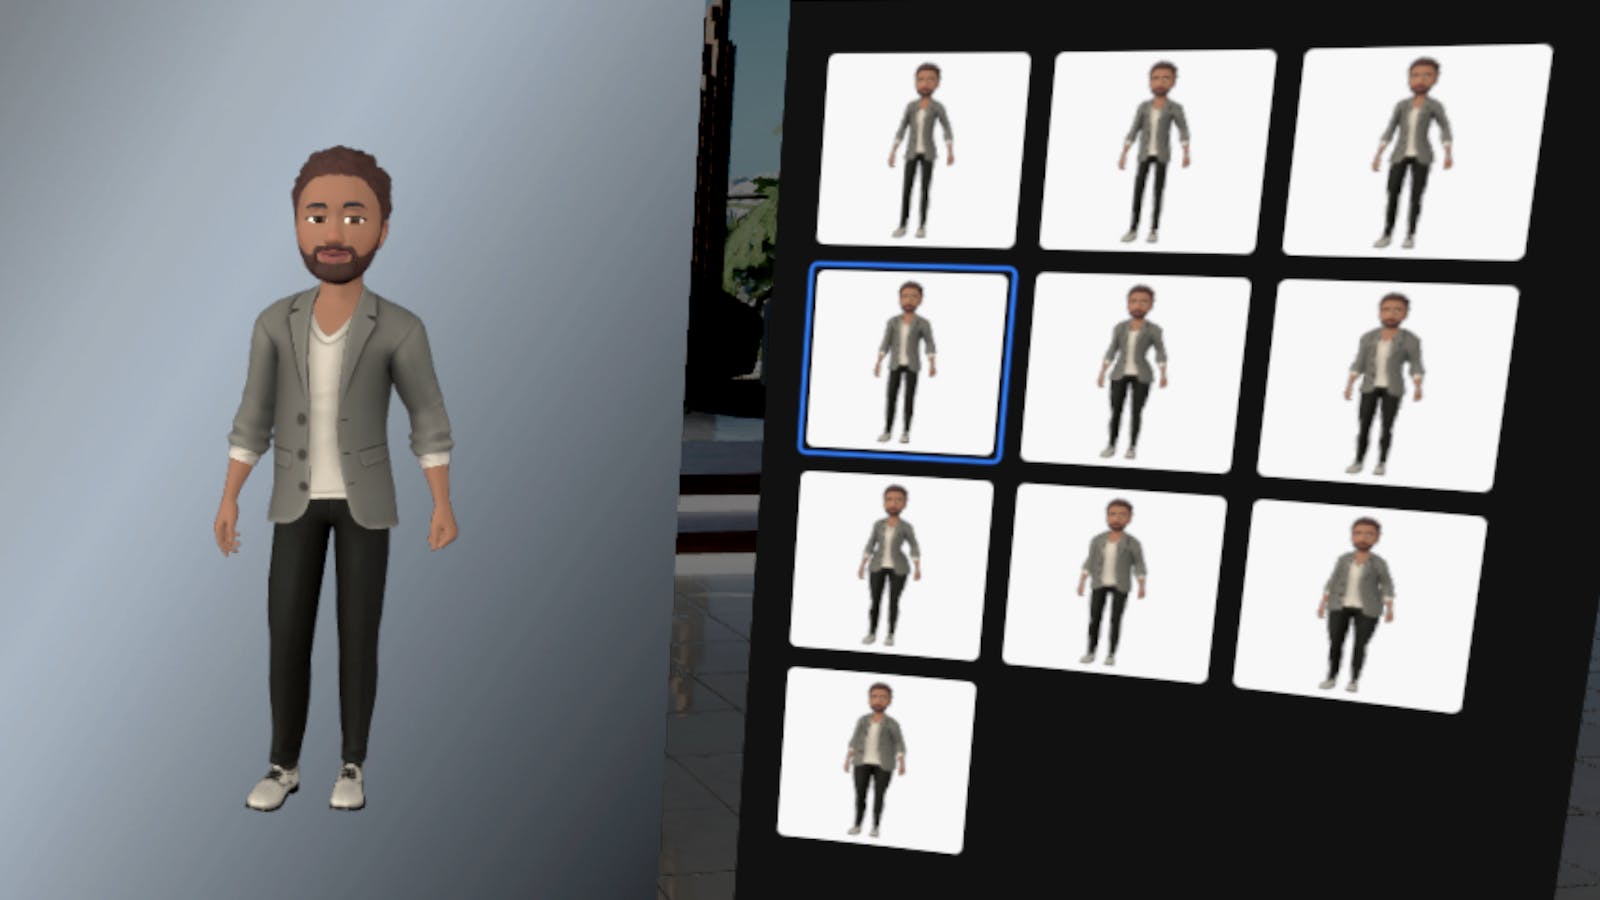 The customization interface for Oculus’ new avatars, showcasing several body shape options. Image: Facebook